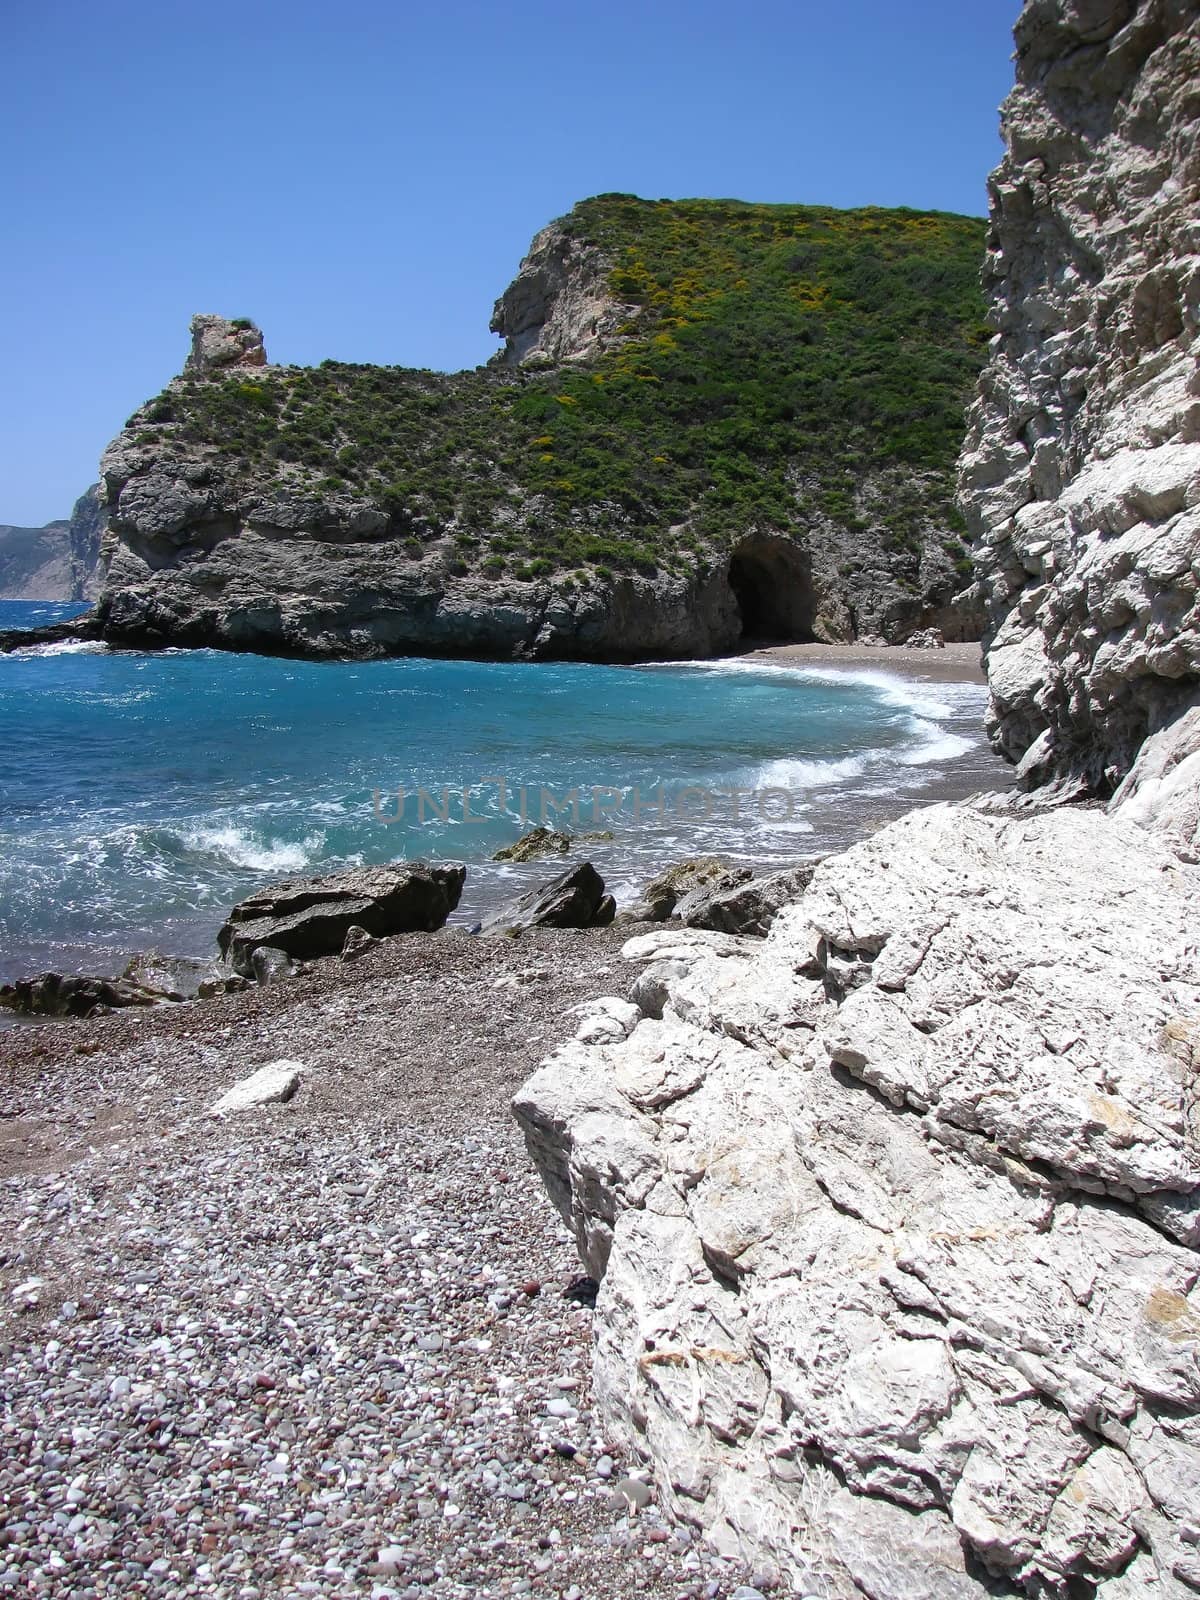 a scenic picture of a coastline on Kythera island, Greece